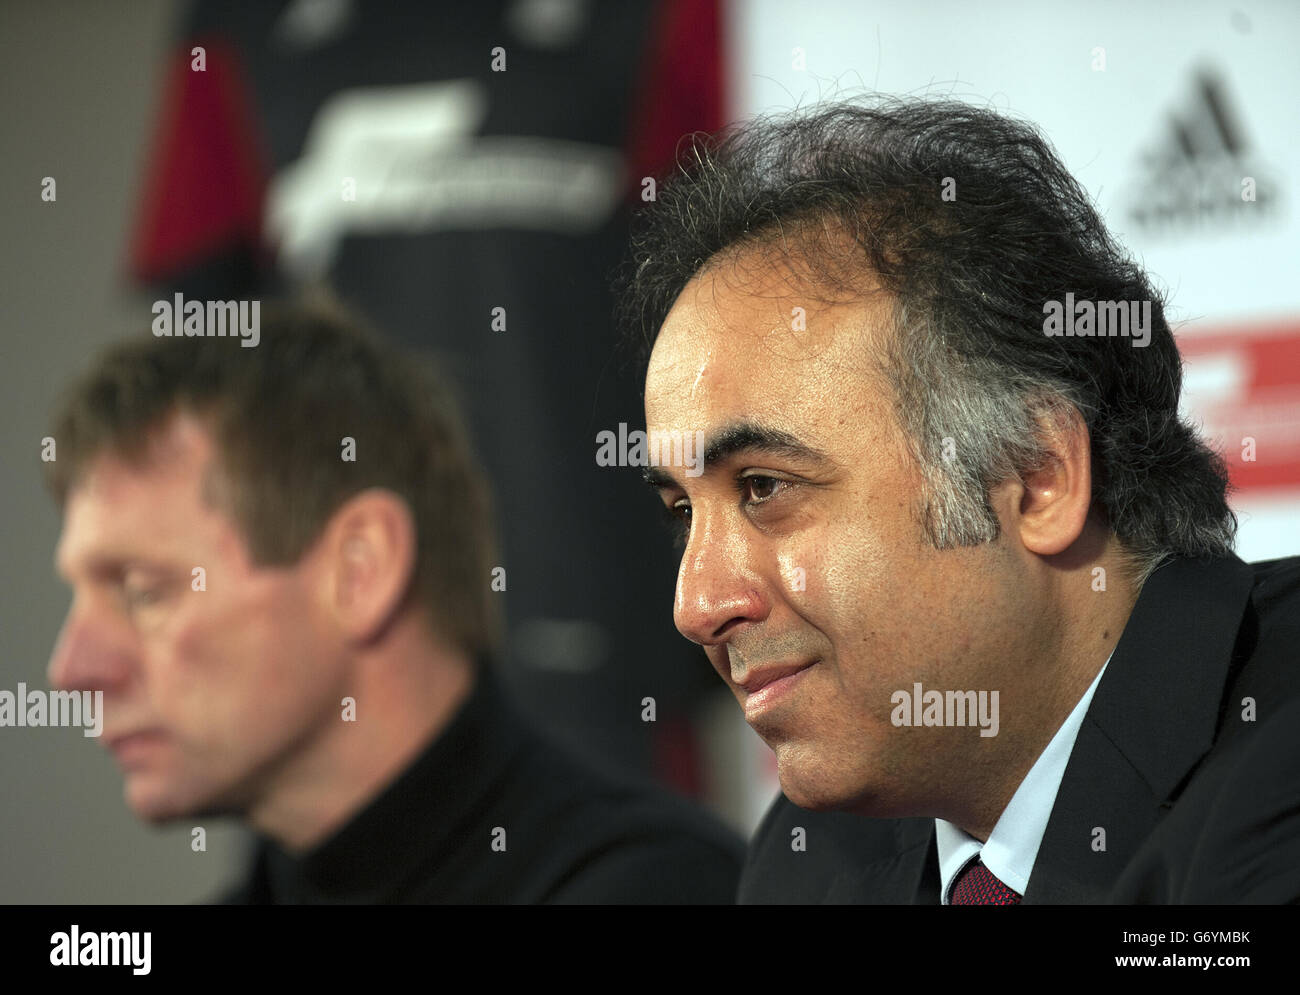 Fawaz Al-Hasawi during a press conference where Stuart Pearce was confirmed as Nottingham Forest manager starting on July 1st Stock Photo